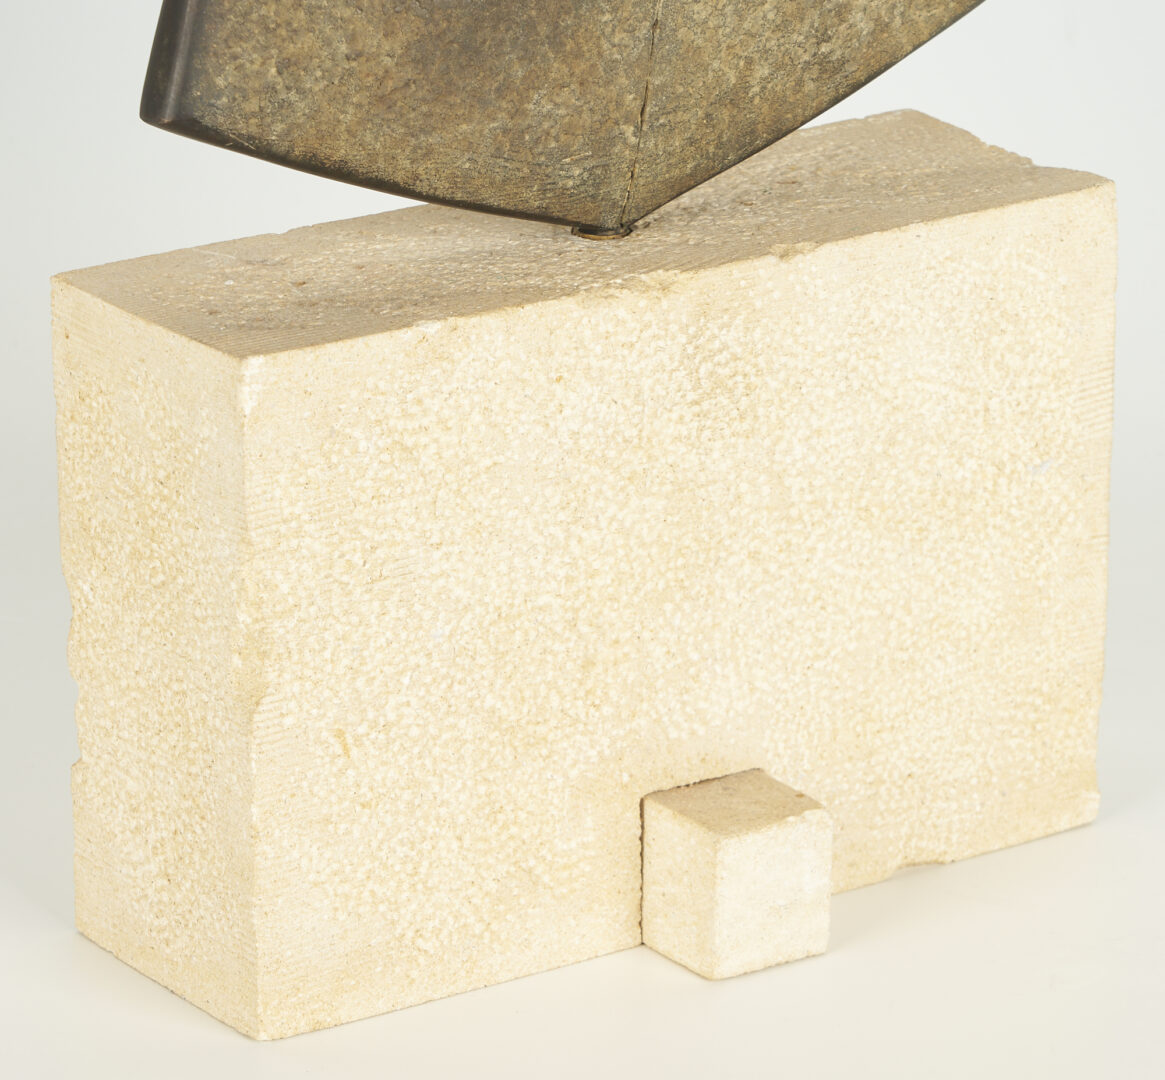 Lot 807: Jim Martin Abstract Bronze and Stone Sculpture